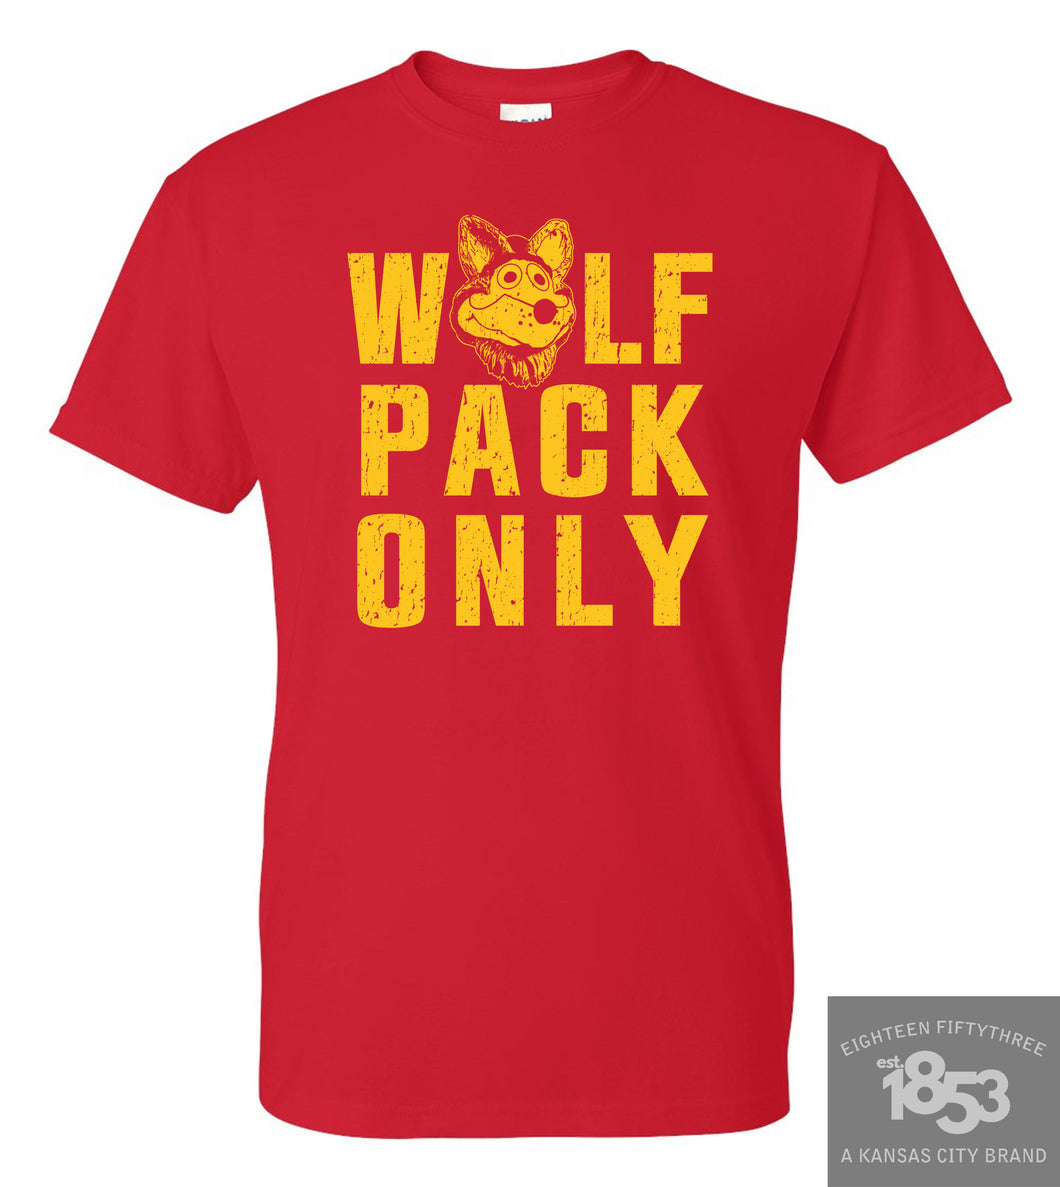 WOLFPACK!